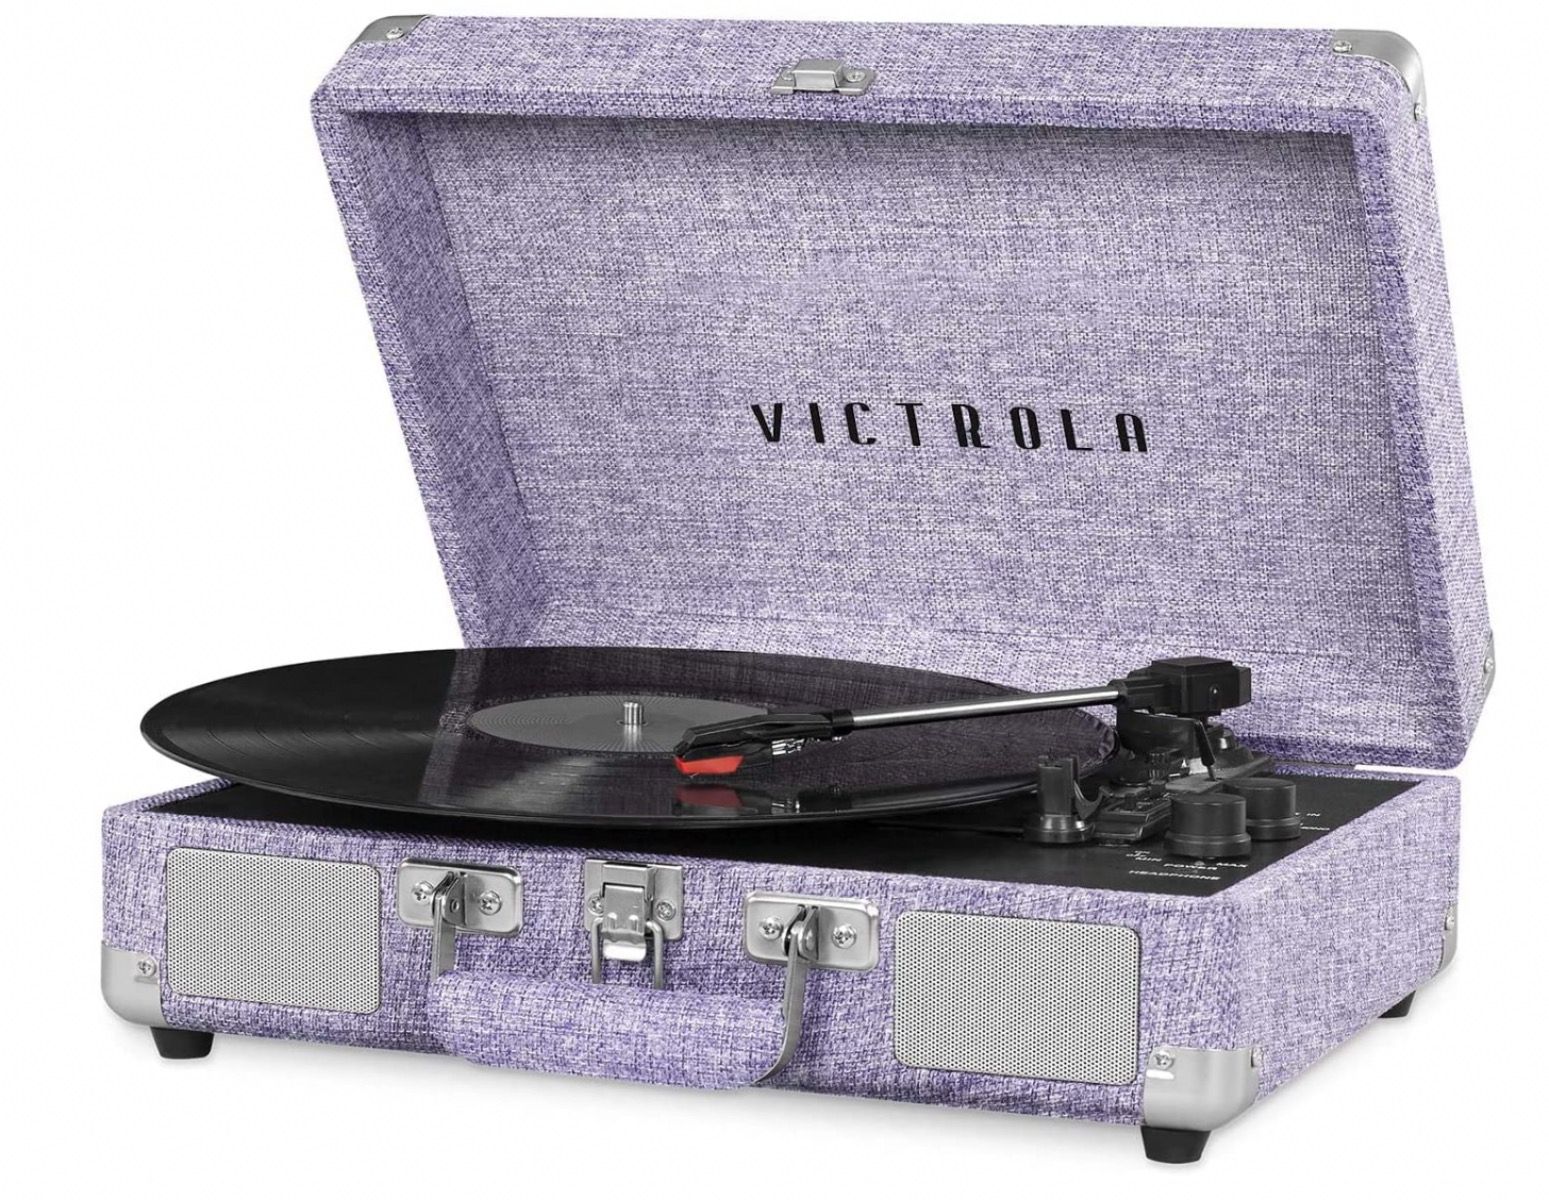 Open light-purple colored Victrola Suitcase record player